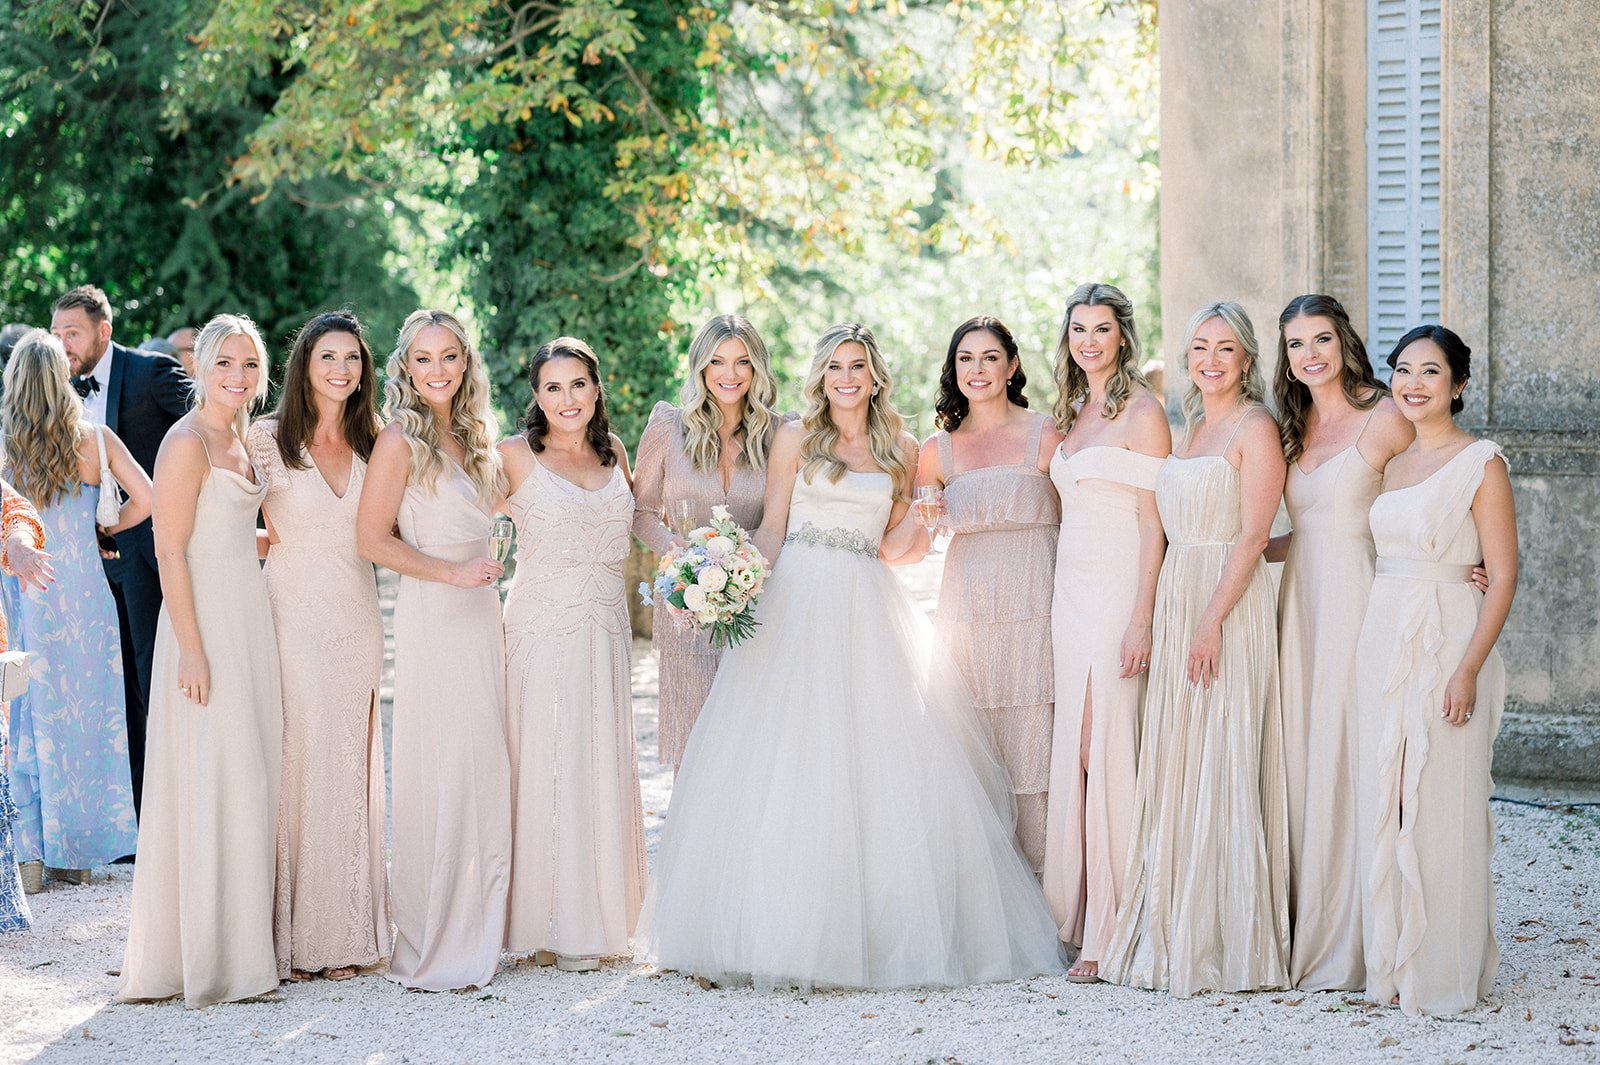 Taylor and Adam’s Glamorous and Timeless Wedding at Chateau Robernier ...